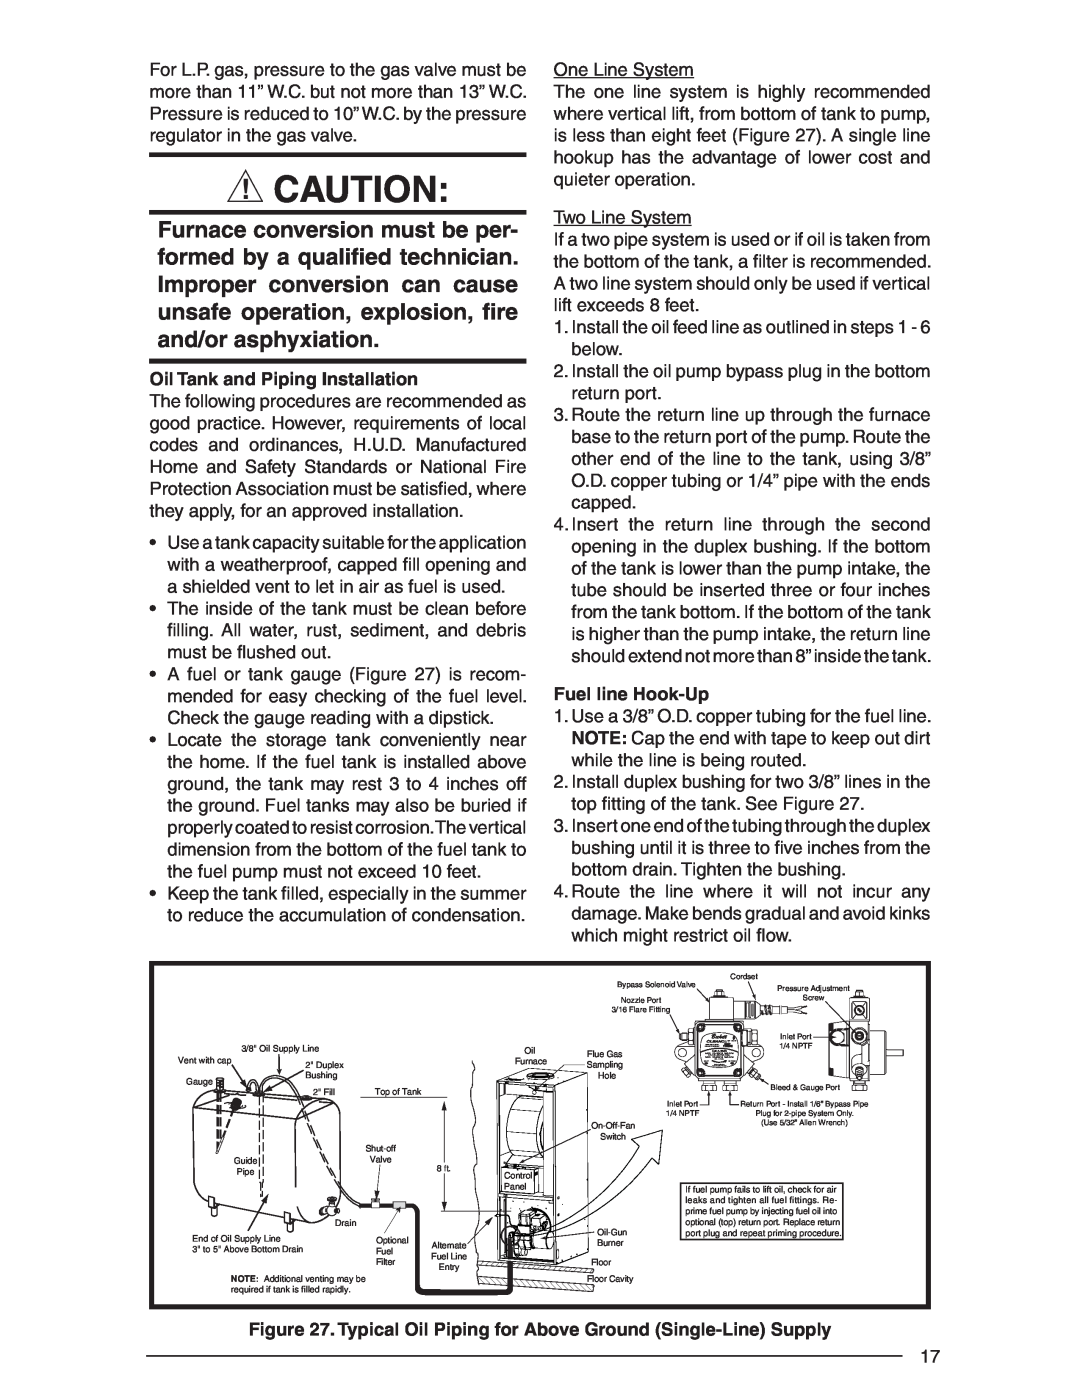 Nordyne AND M5S, SERIES M1B installation instructions Oil Tank and Piping Installation, Fuel line Hook-Up 